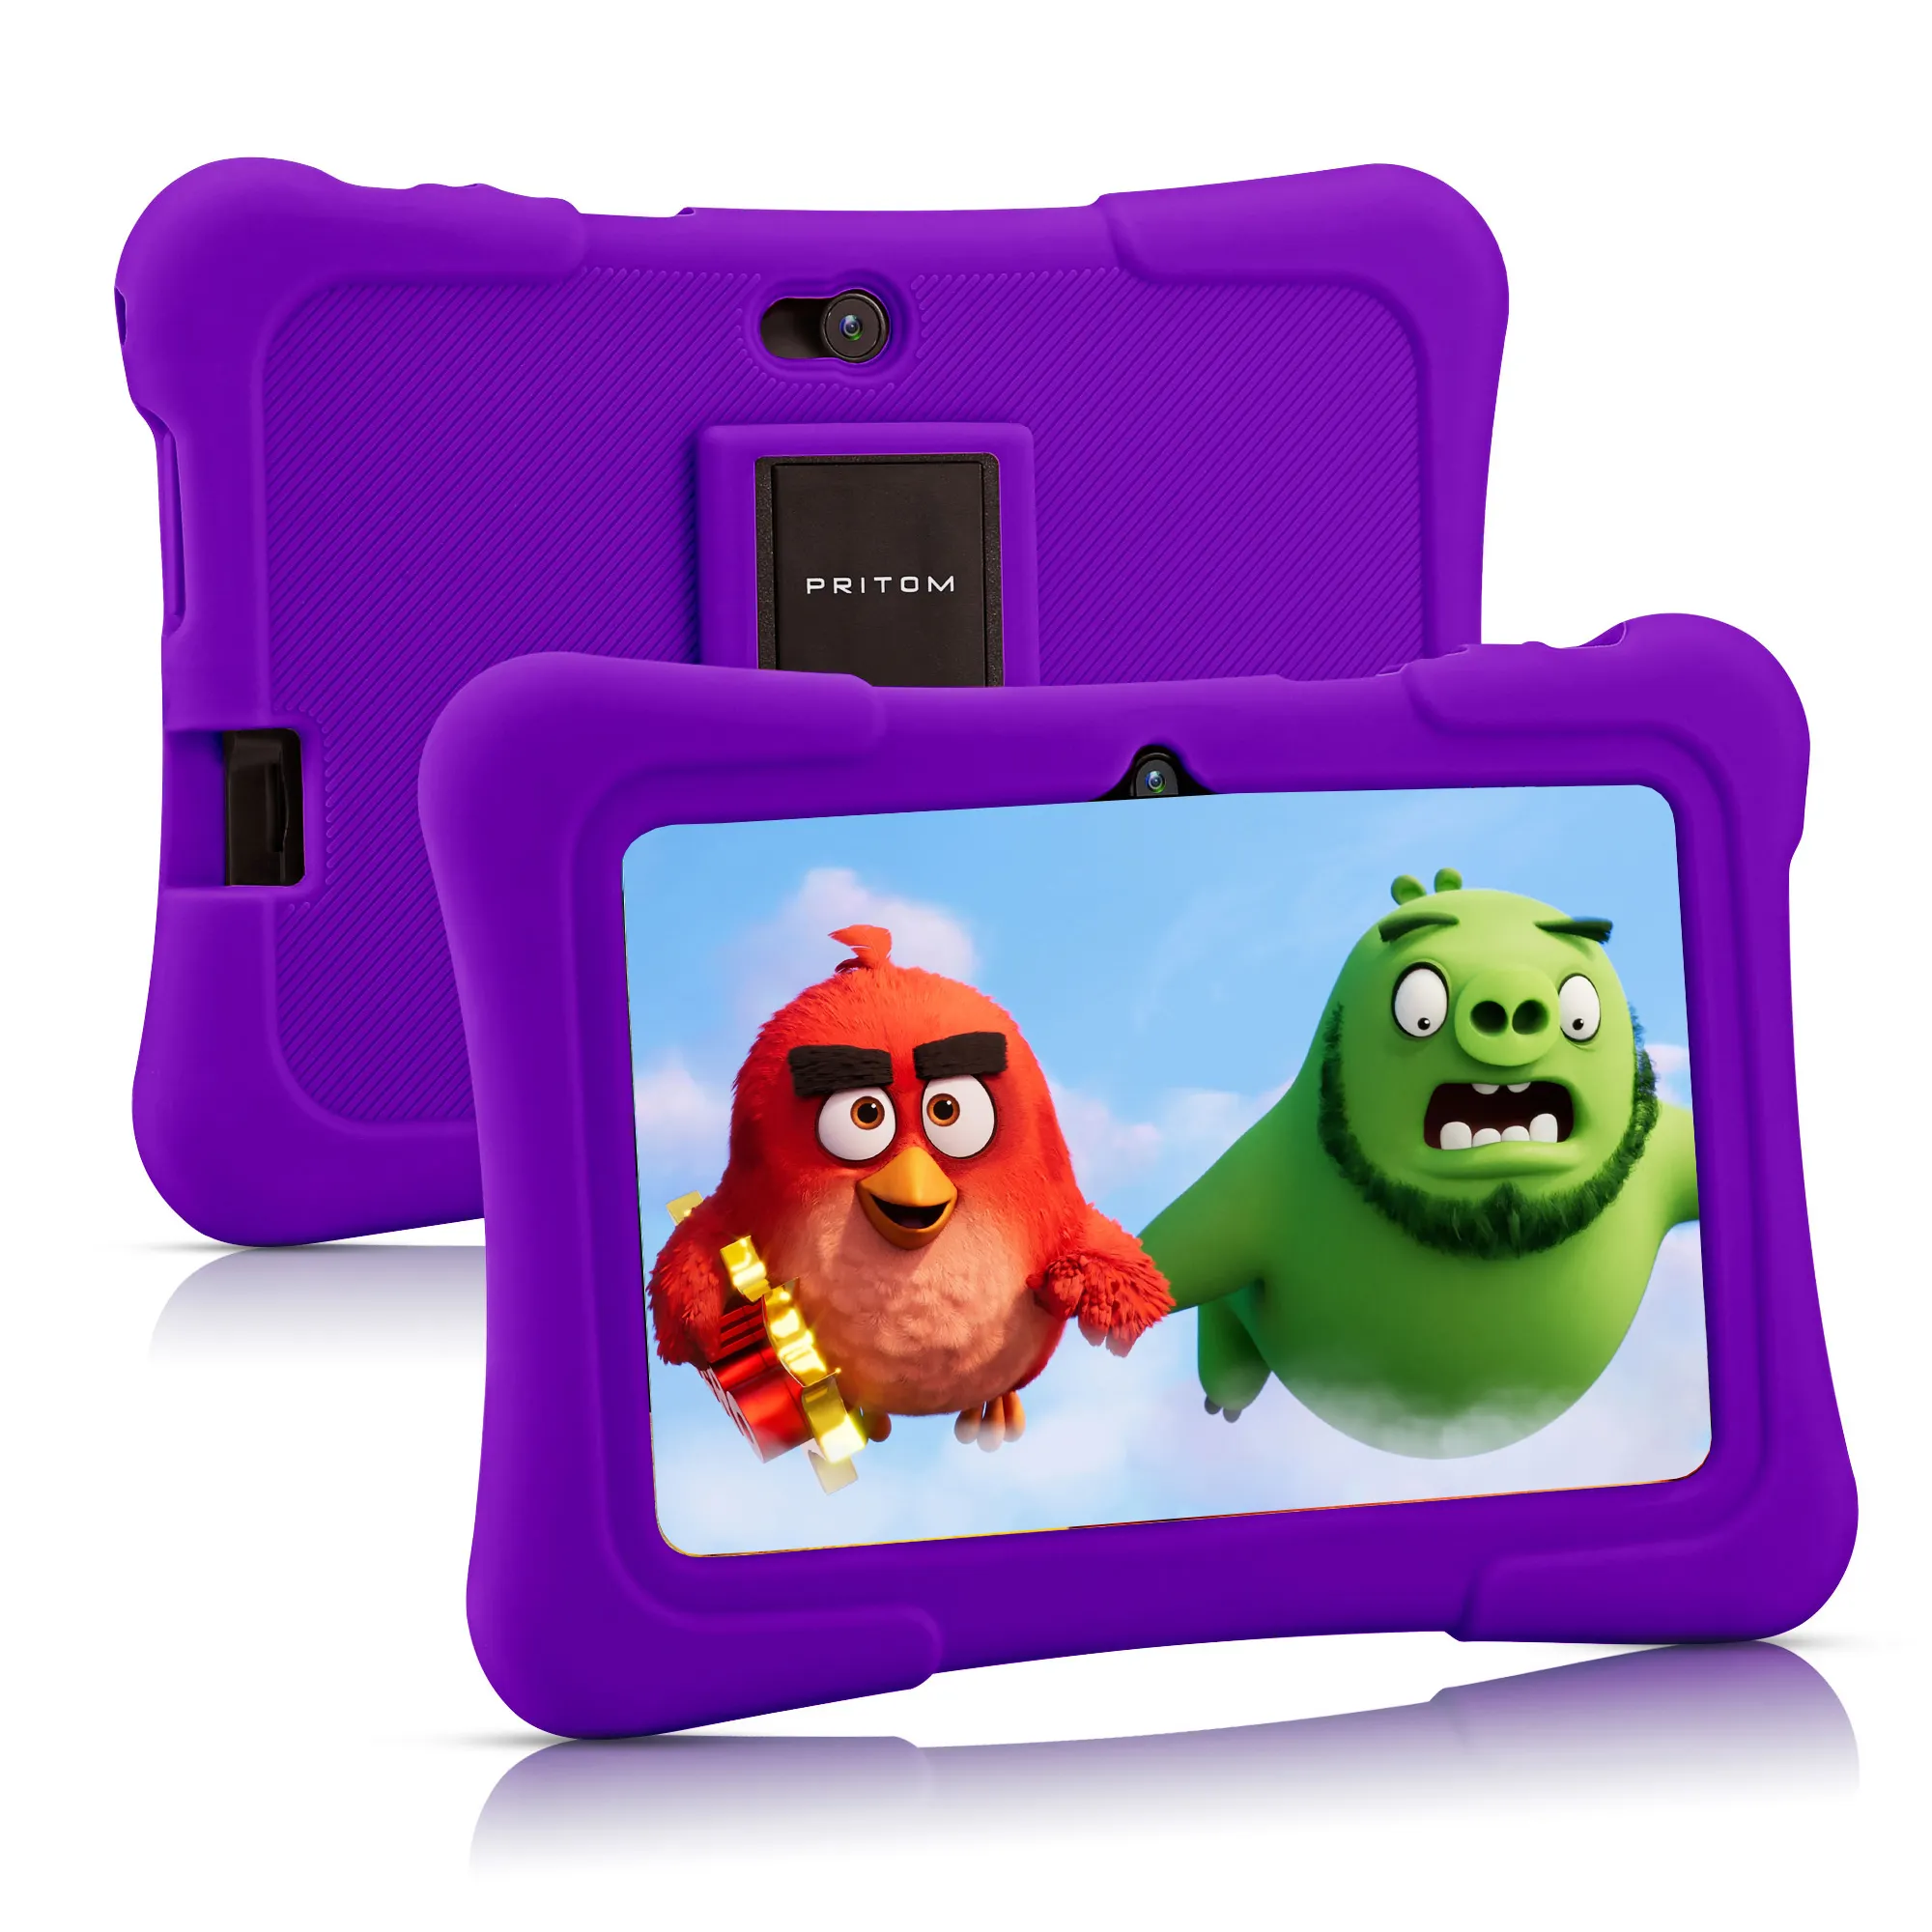 Benton Rugged Tablet Android A50 Quad-Core 1024*600 HD Kids Tablets 7 Inches Android Educational